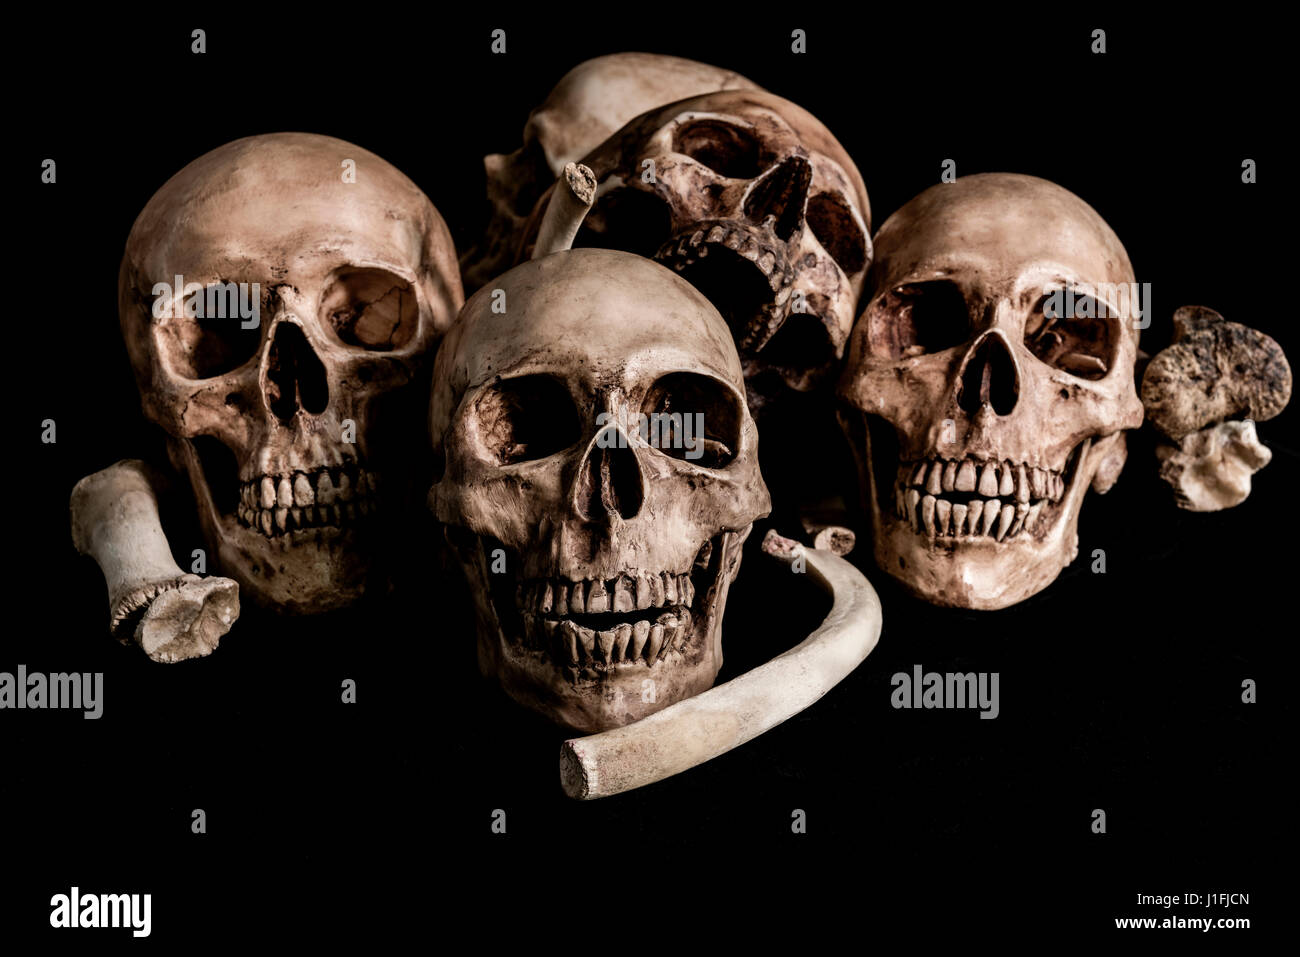 Human skull and bones, genocides concept and horror darkness Stock Photo